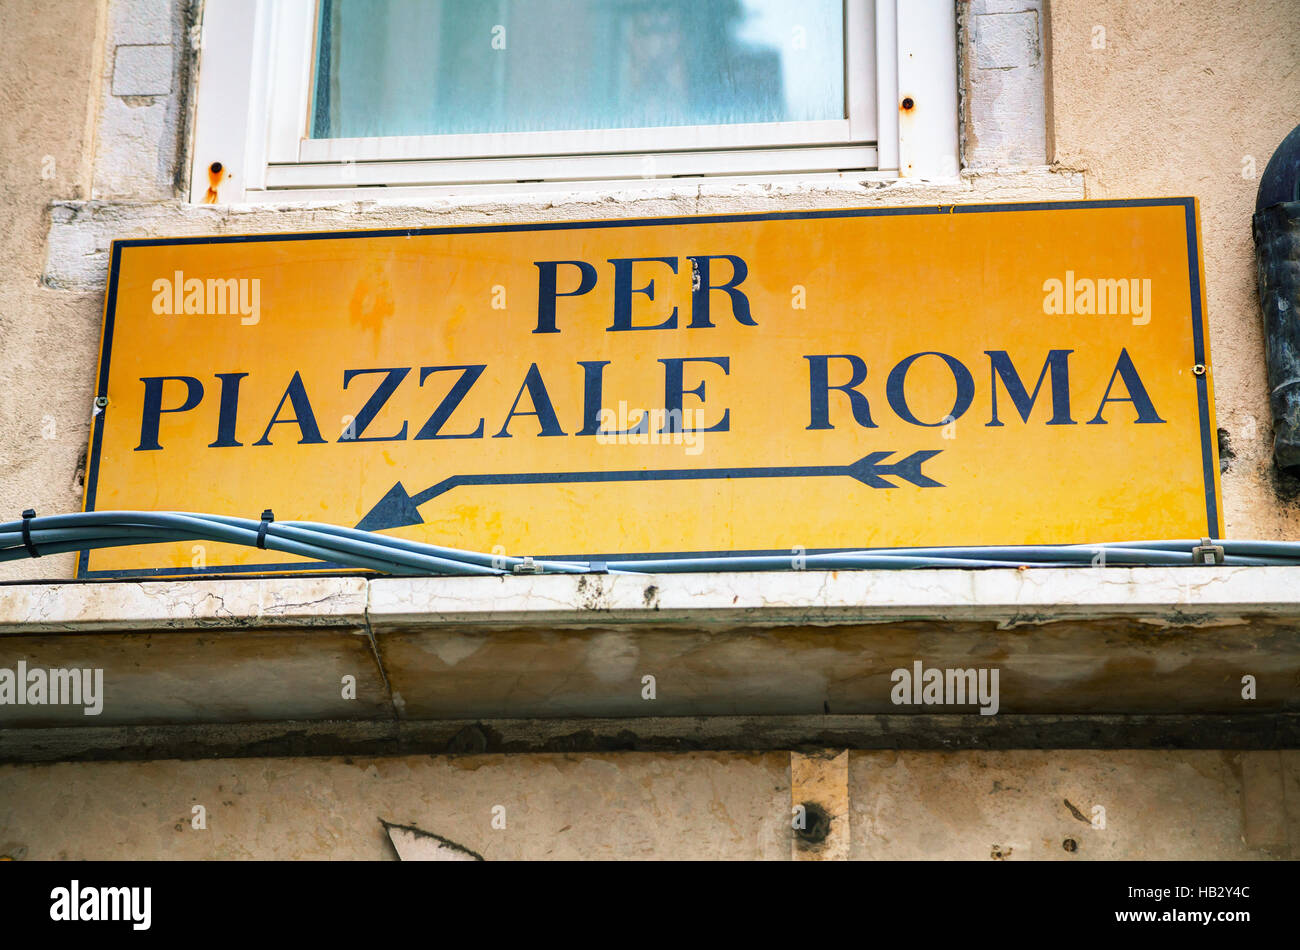 Piazzale Roma direction sign in Venice Stock Photo